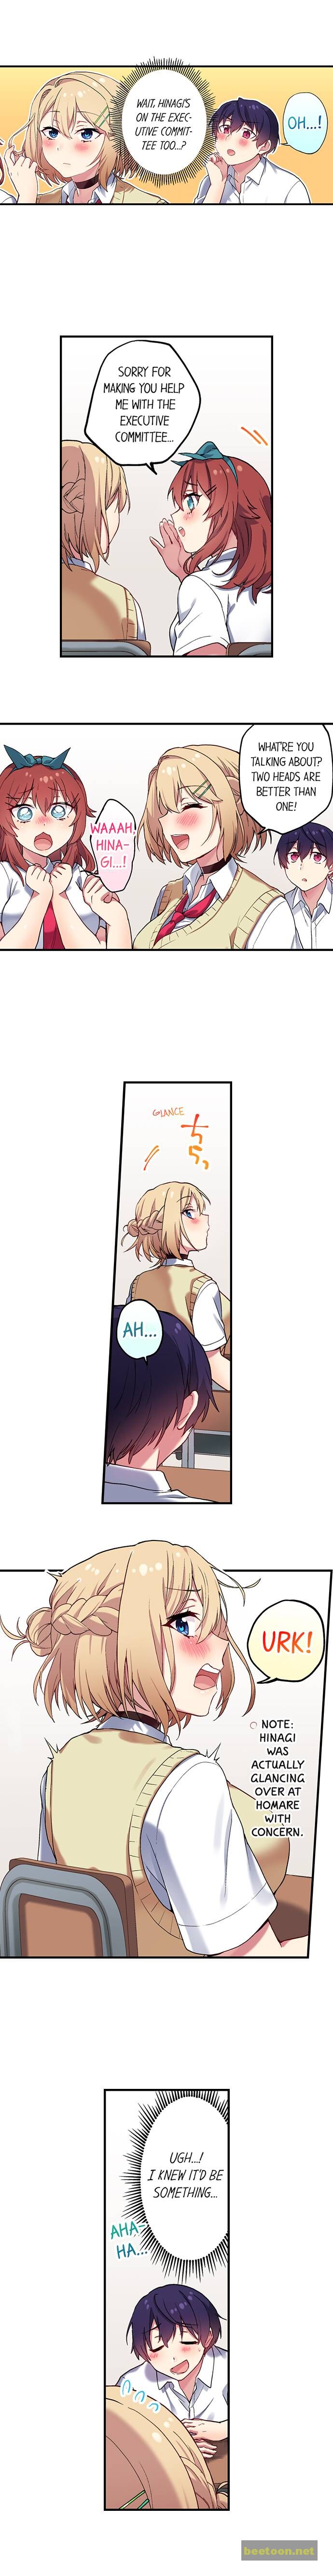 I Can See The Number Of Times People Orgasm Chapter 109 - MyToon.net